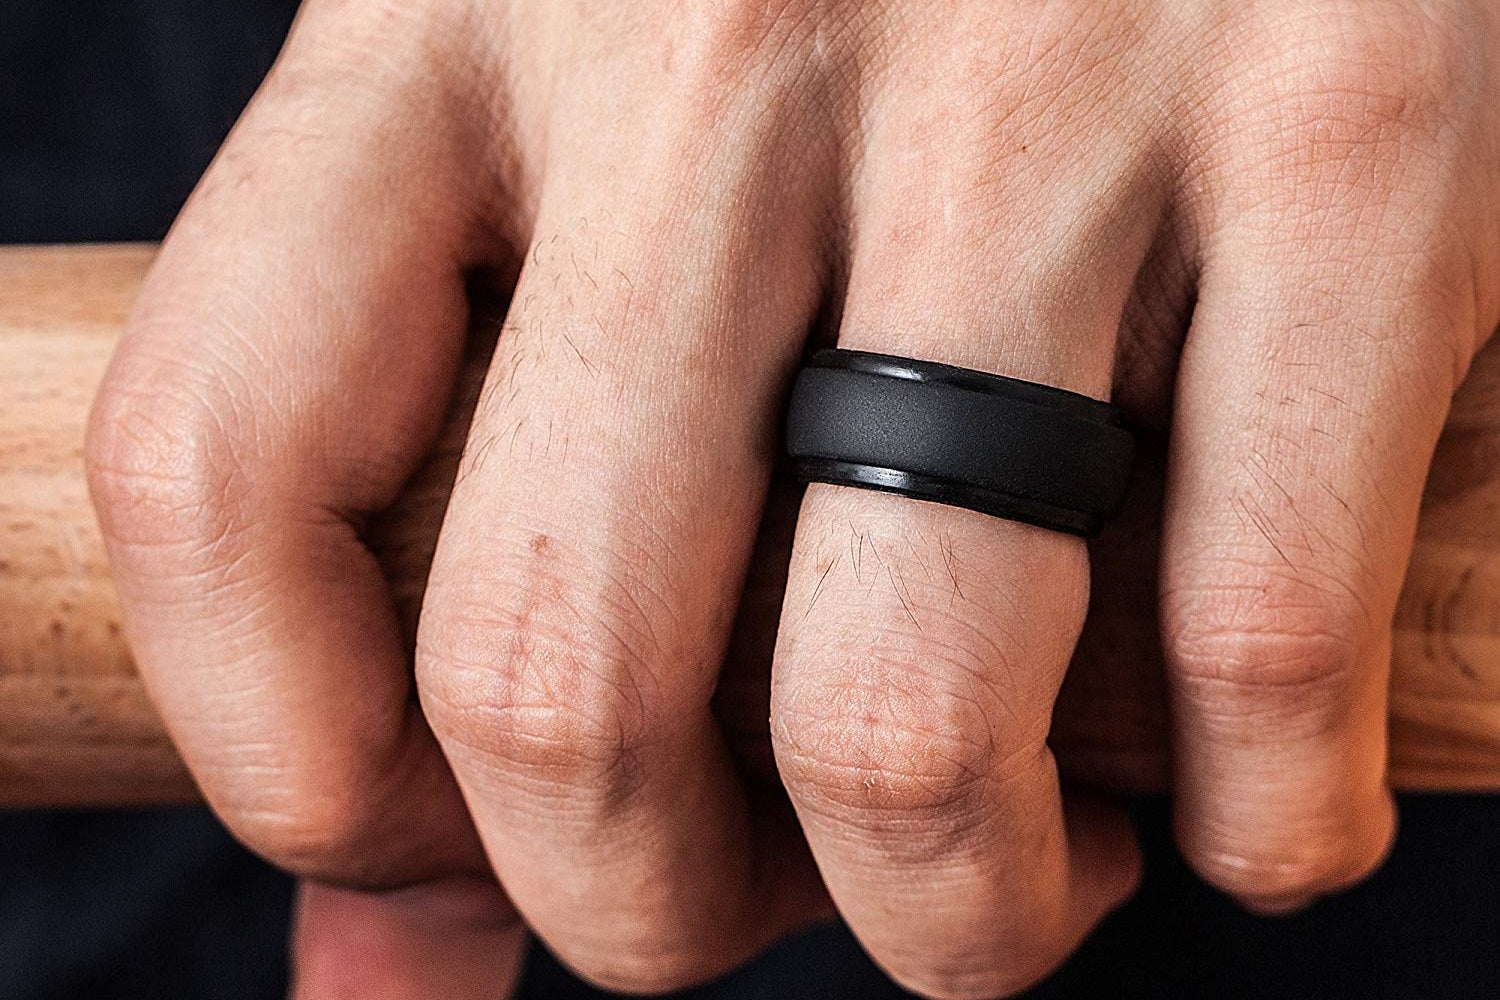 Guys hand holding wood wearing our Black Step Edge Men's Silicone Rings. The Best Silicone Rings For Men Online.